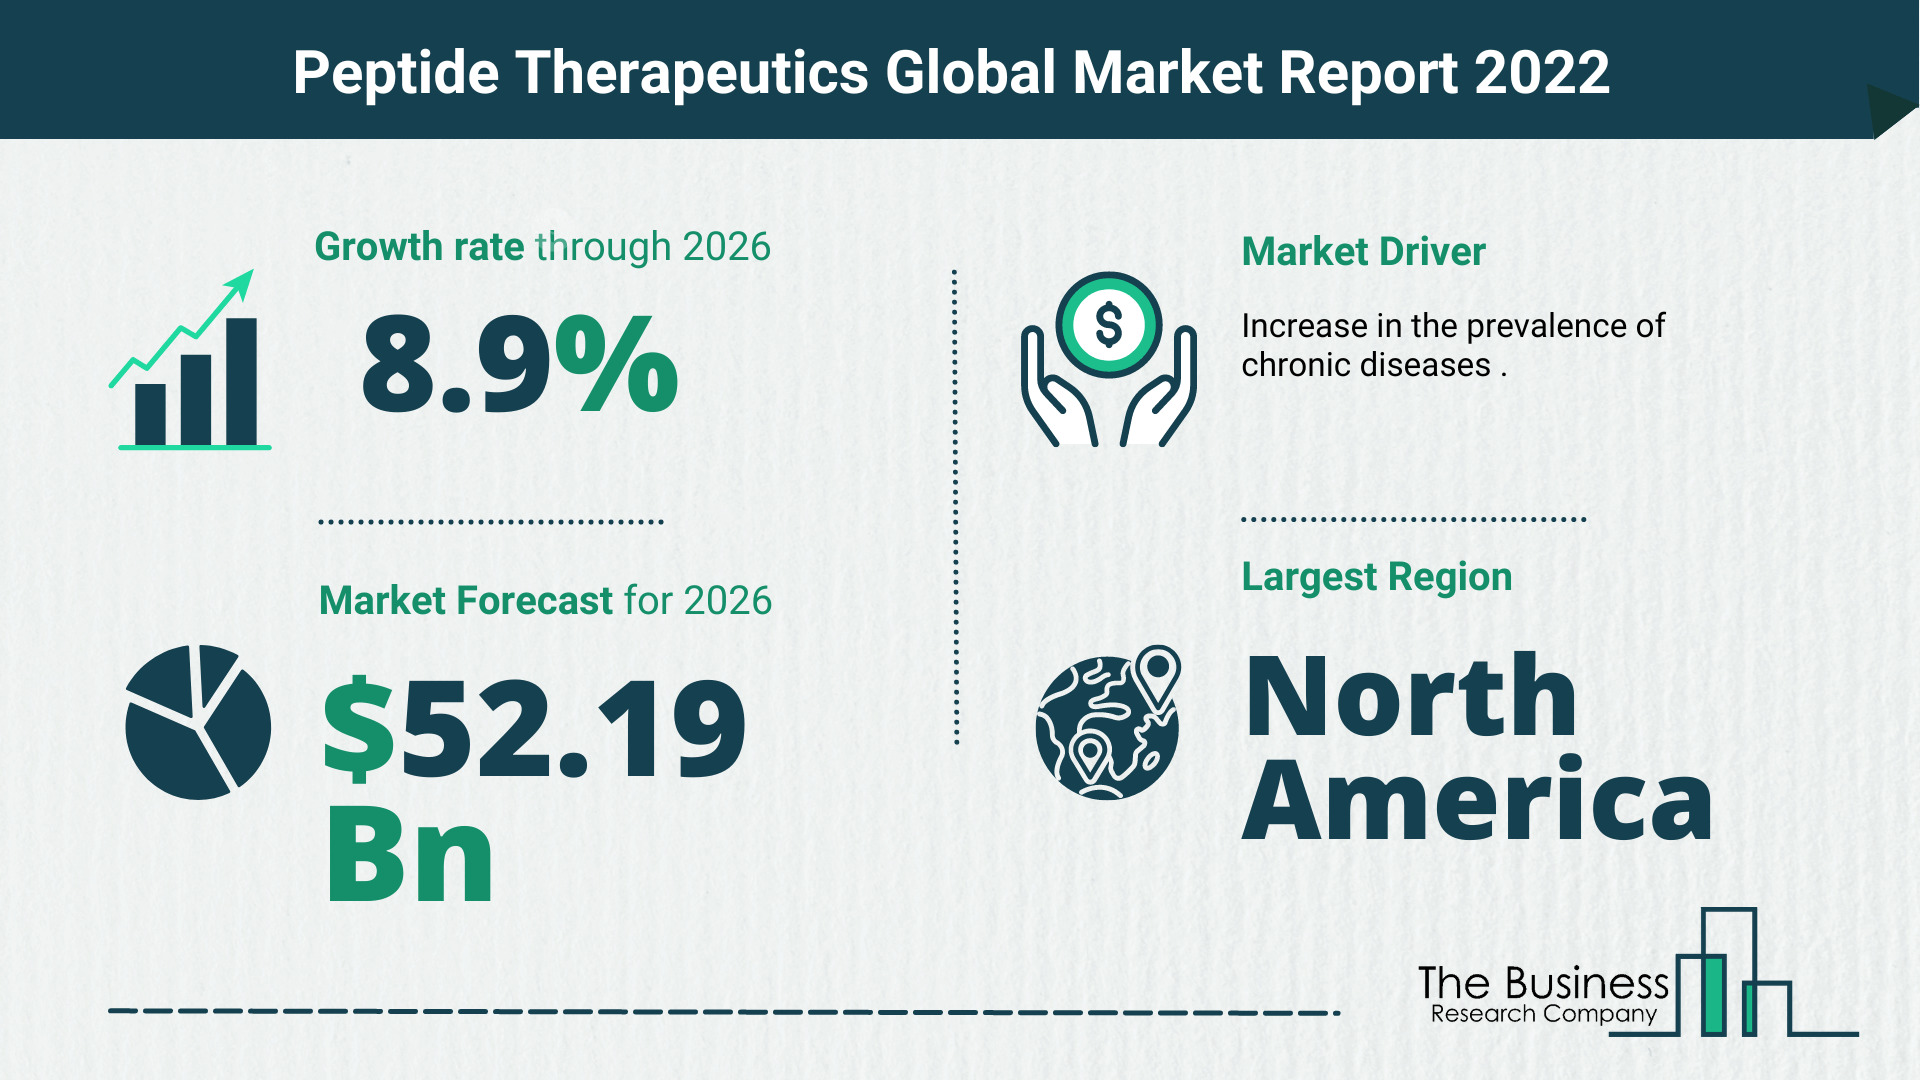 What Is The Peptide Therapeutics Market Overview In 2022?